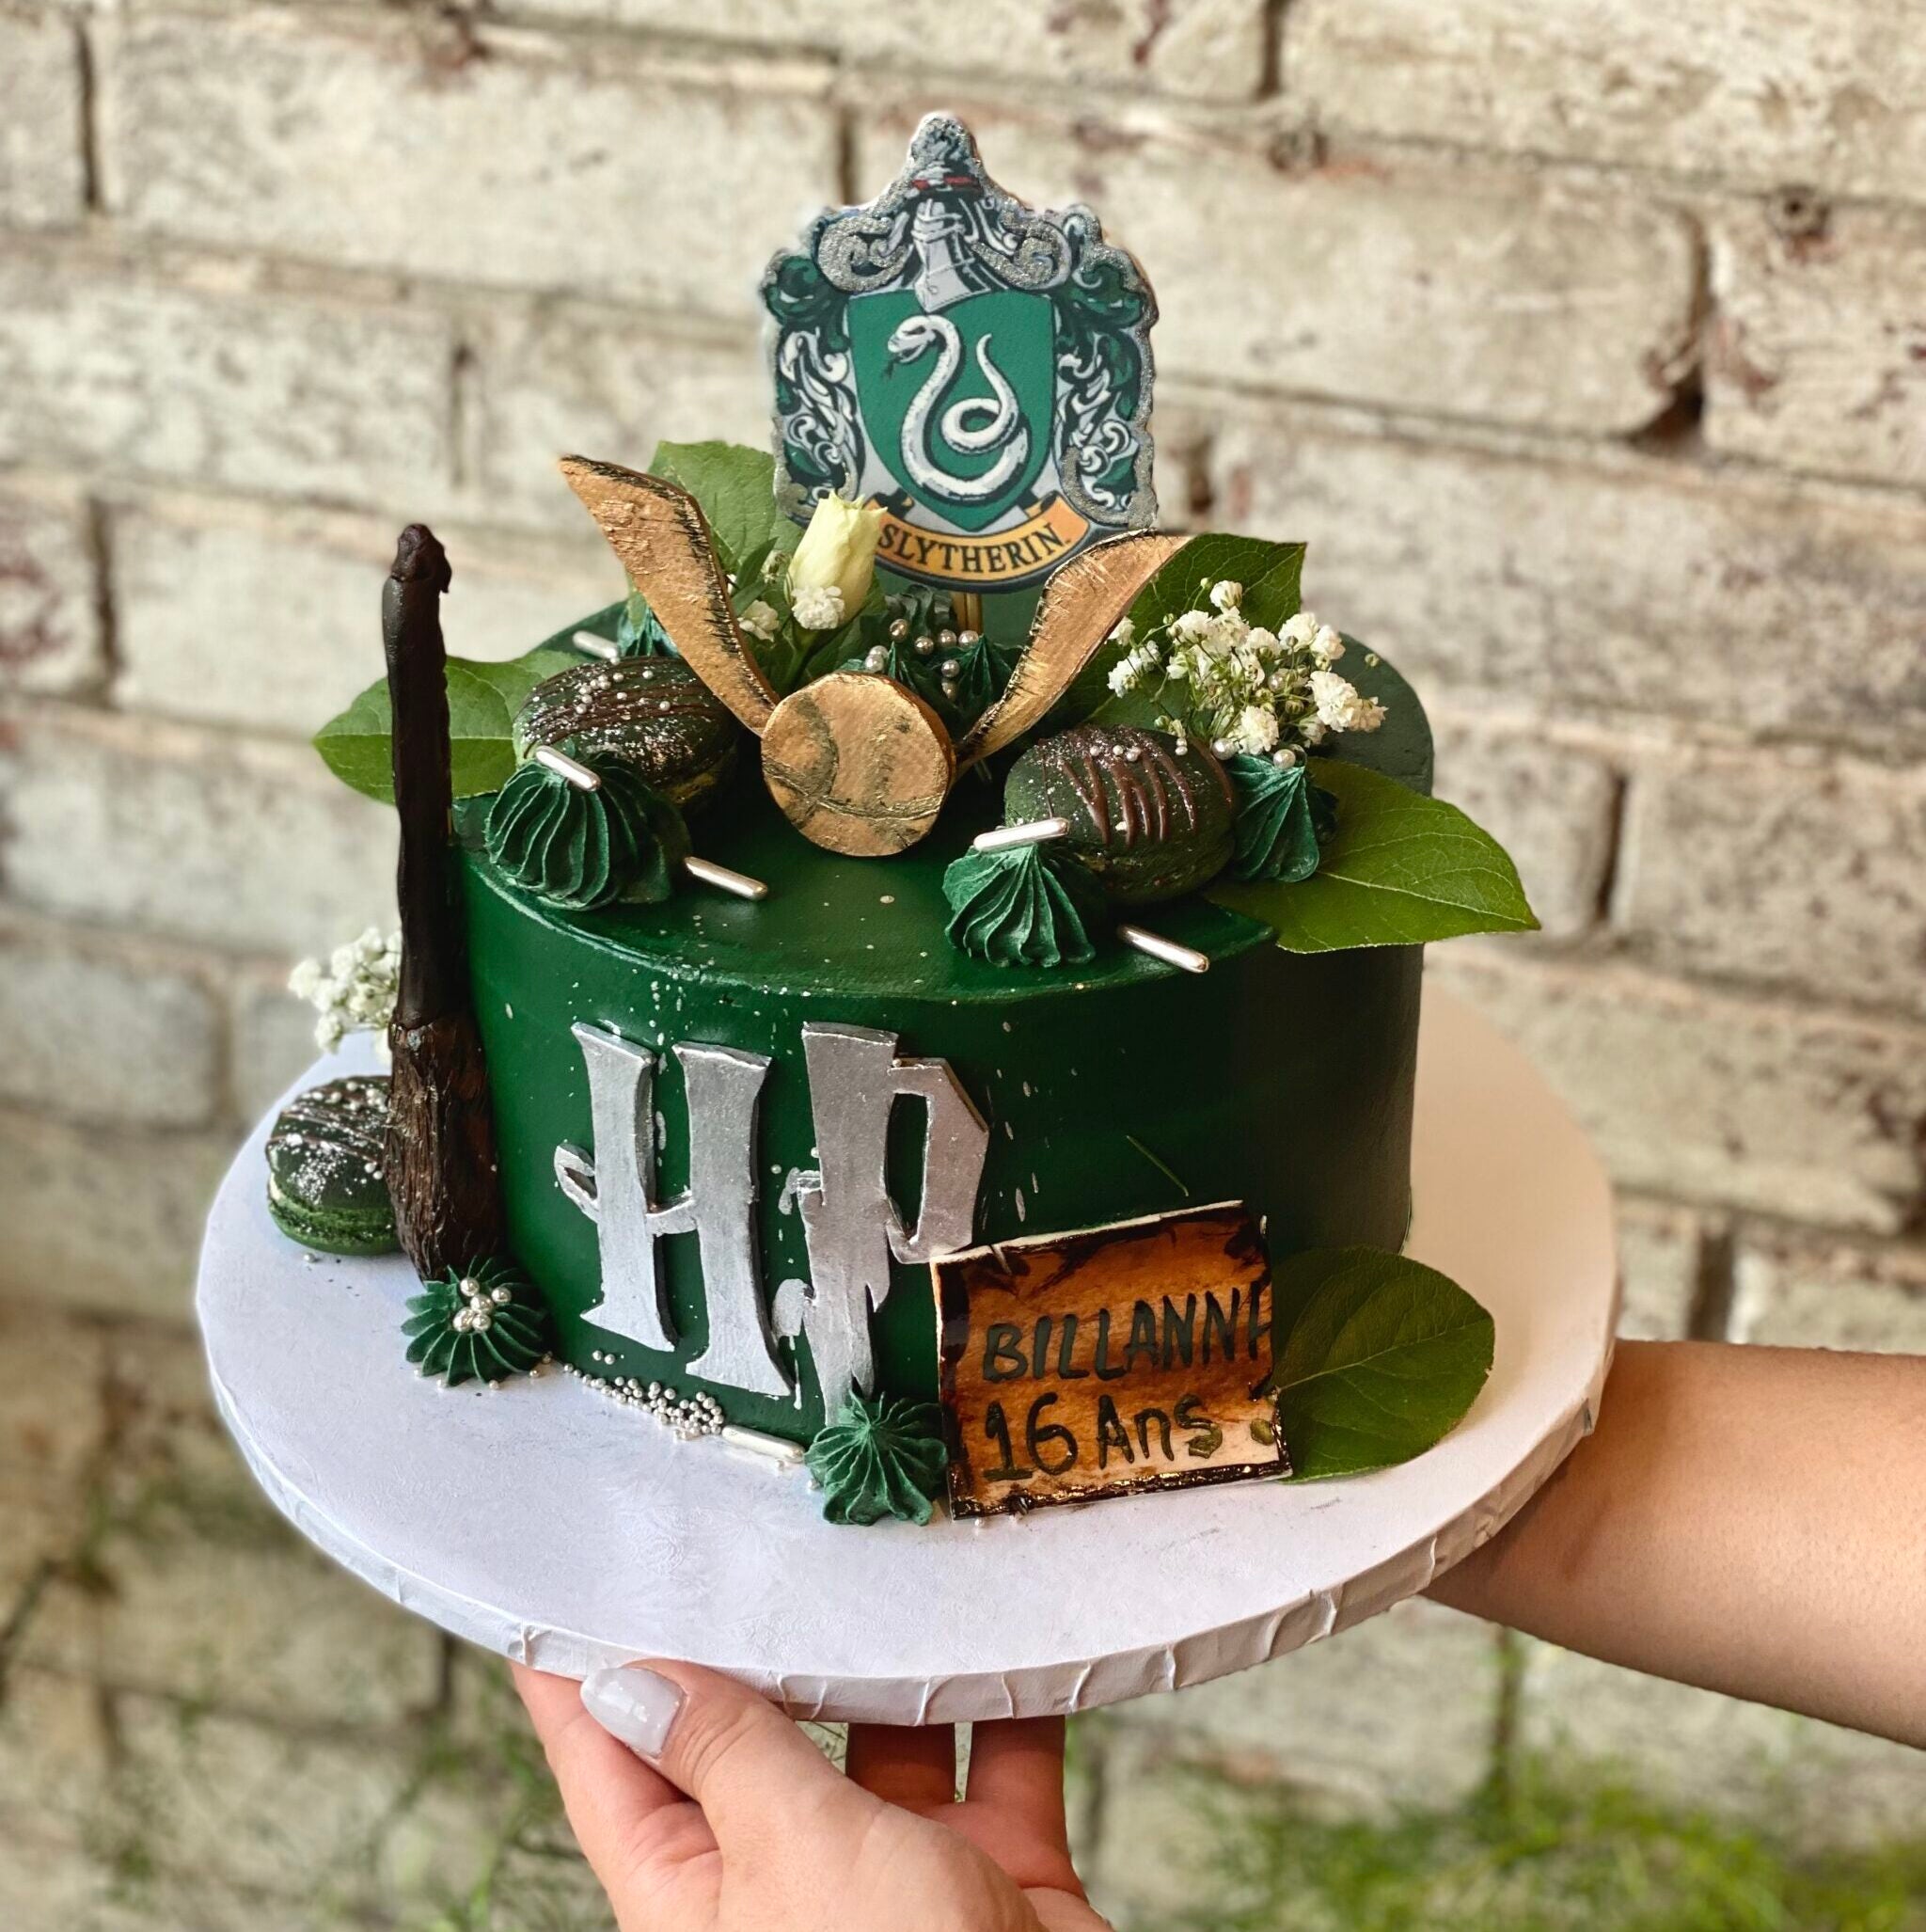 Coolest DIY Harry Potter Birthday Cake - A Labor of Love!